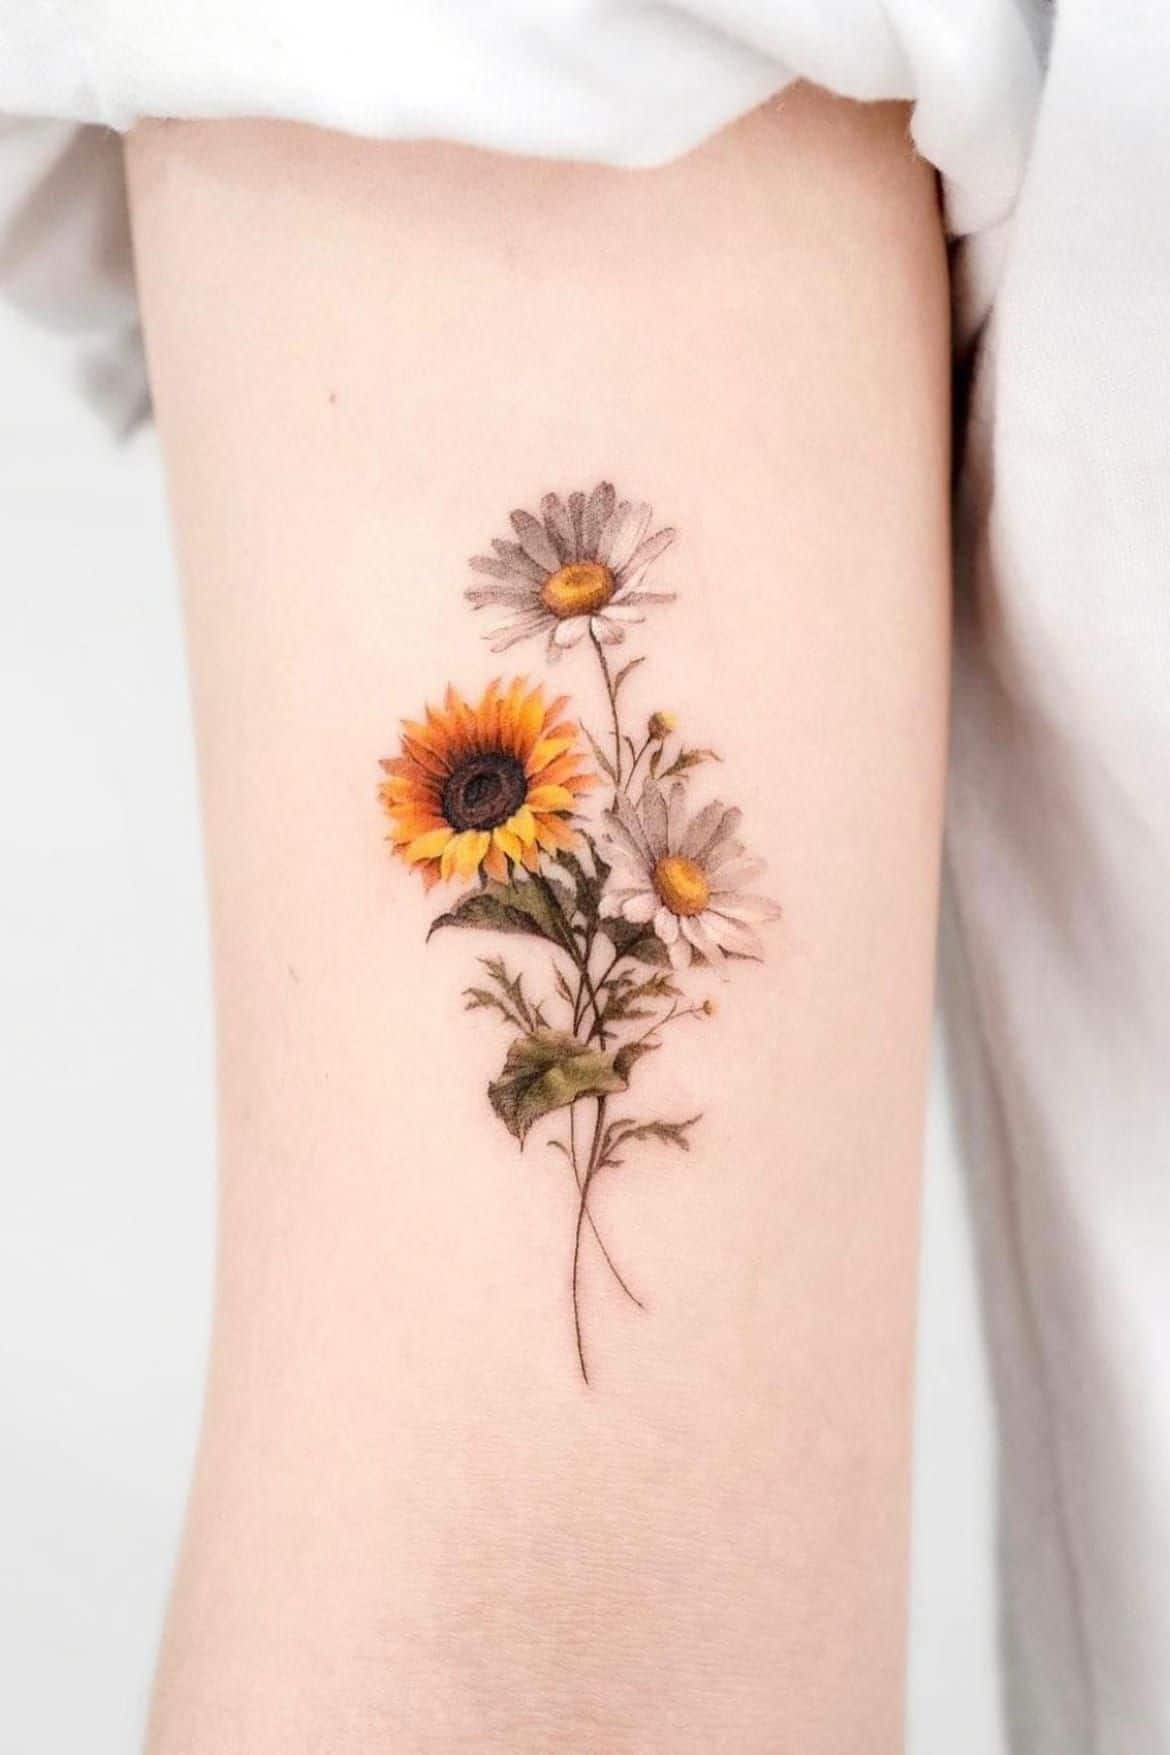 Is it weird for guys to get flower tattoos? - Quora